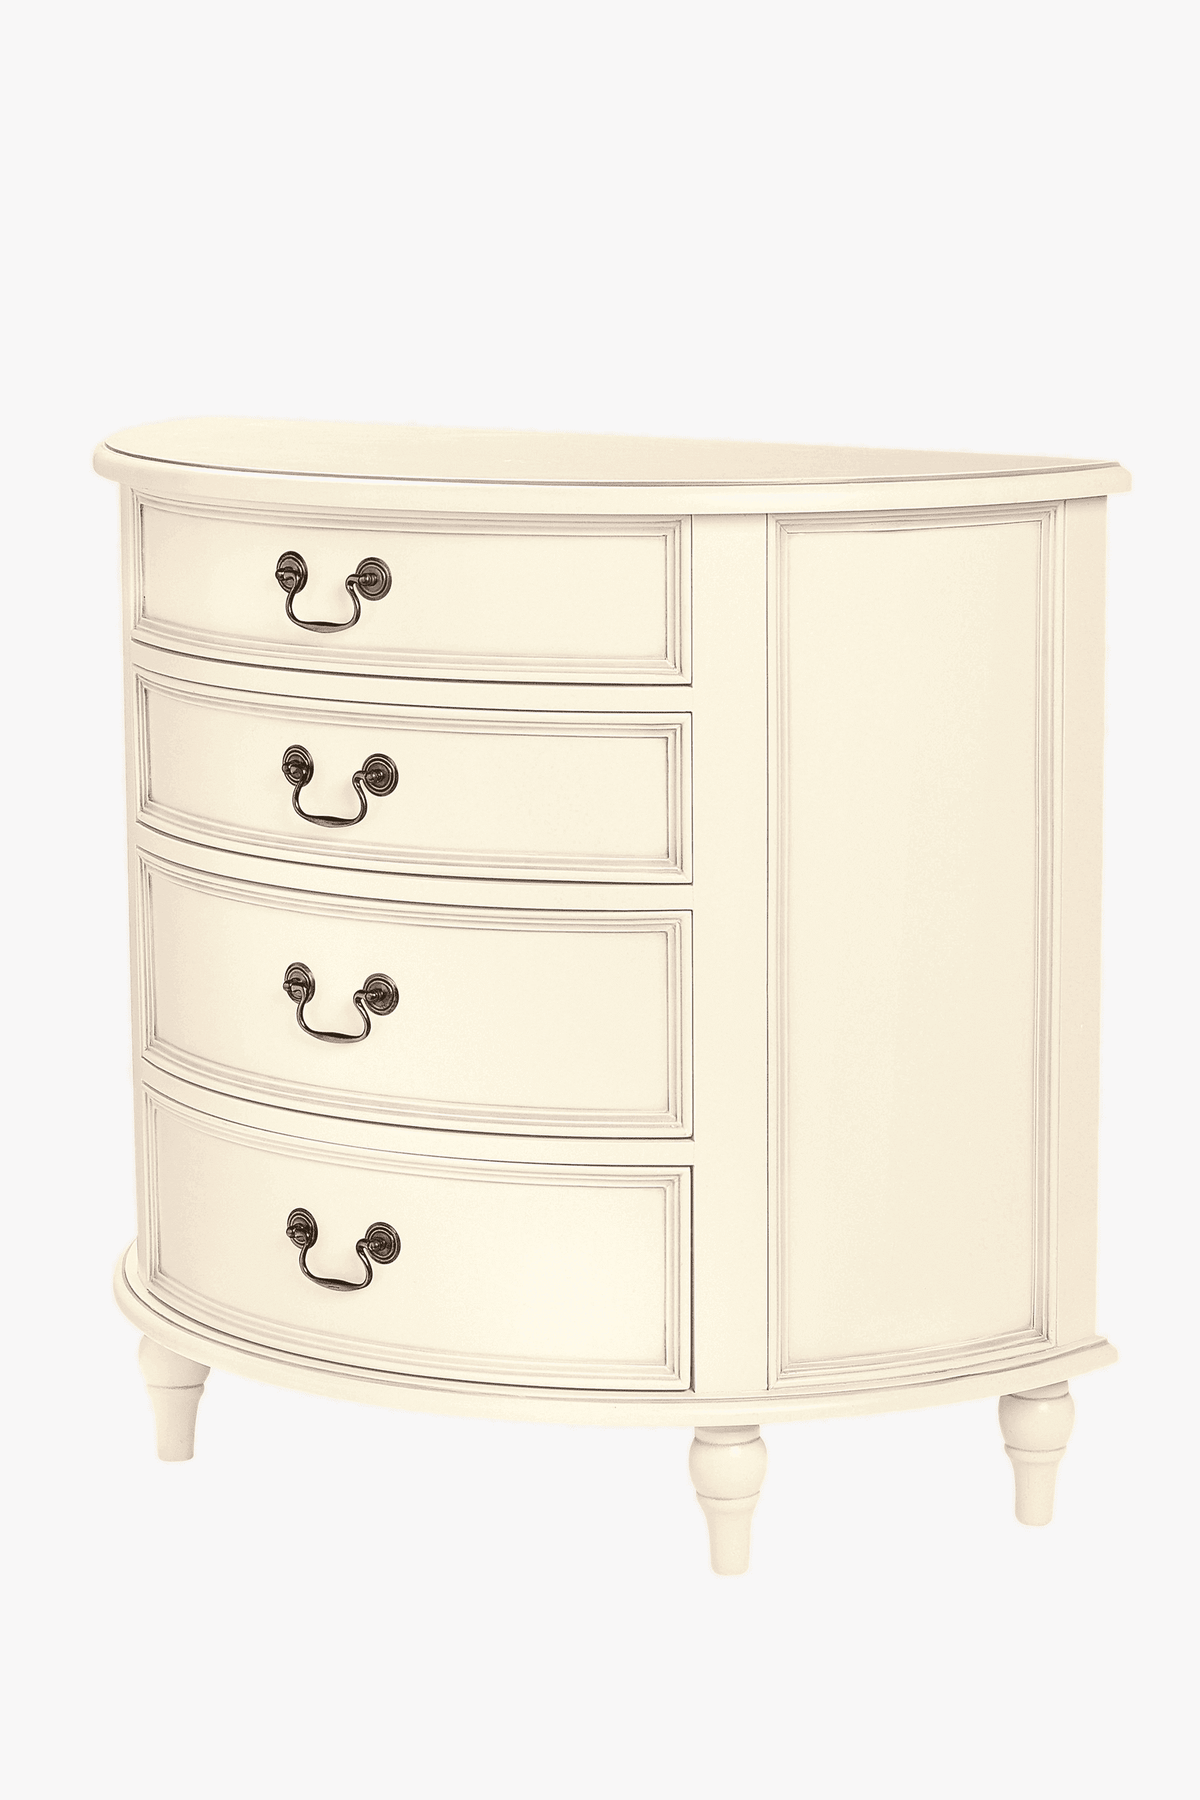 Clifton 4 Drawer Half Moon Chest